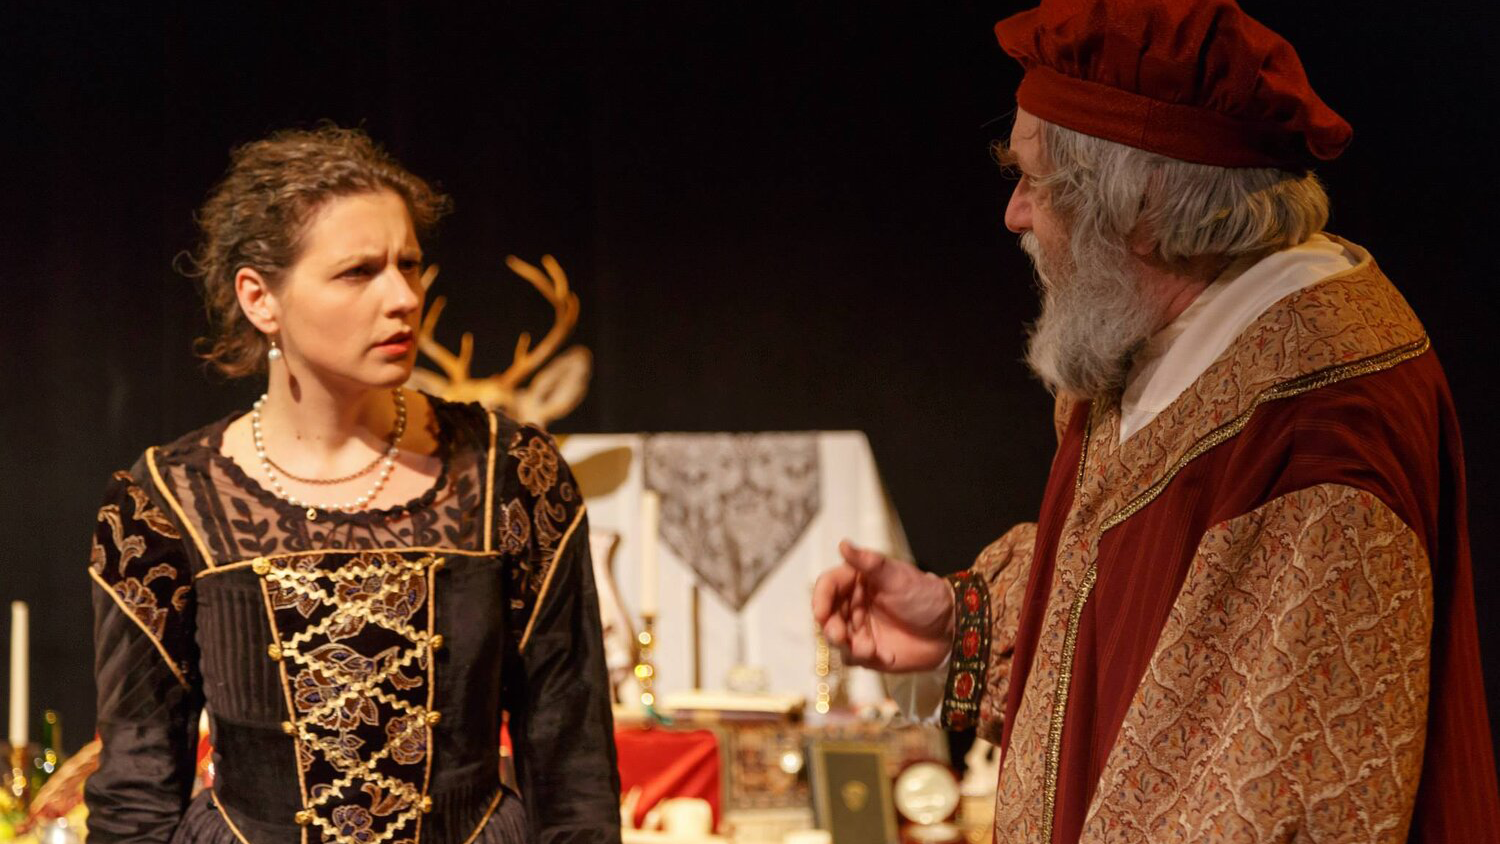 Two actors perform in Richard II. One woman in a black and gold dress looks at a man whose back is to the camera.